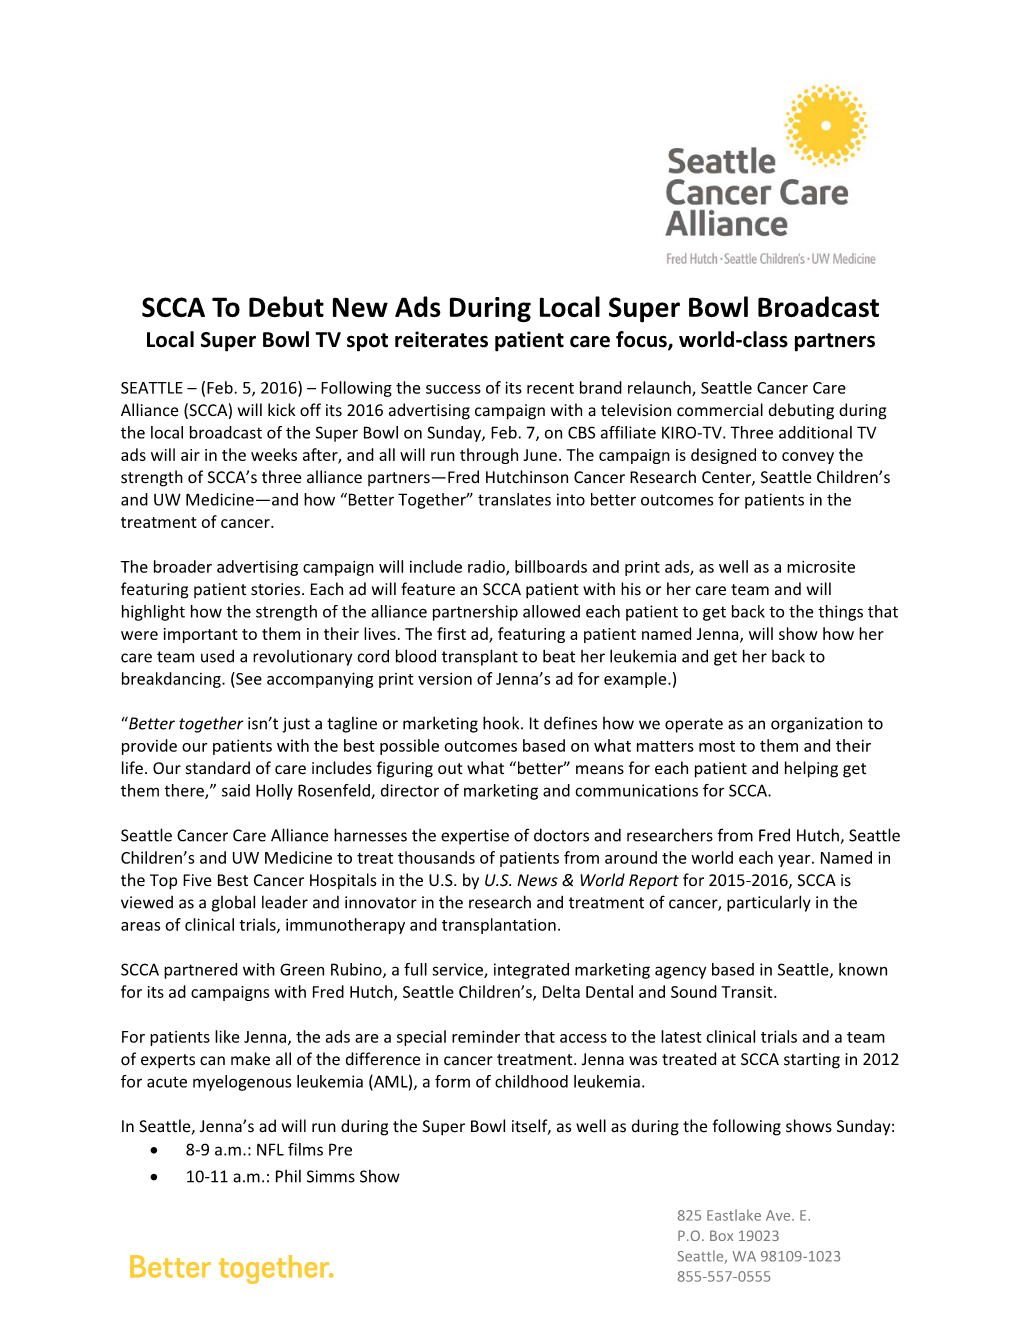 SCCA to Debut New Ads During Local Super Bowl Broadcast Local Super Bowl TV Spot Reiterates Patient Care Focus, World-Class Partners